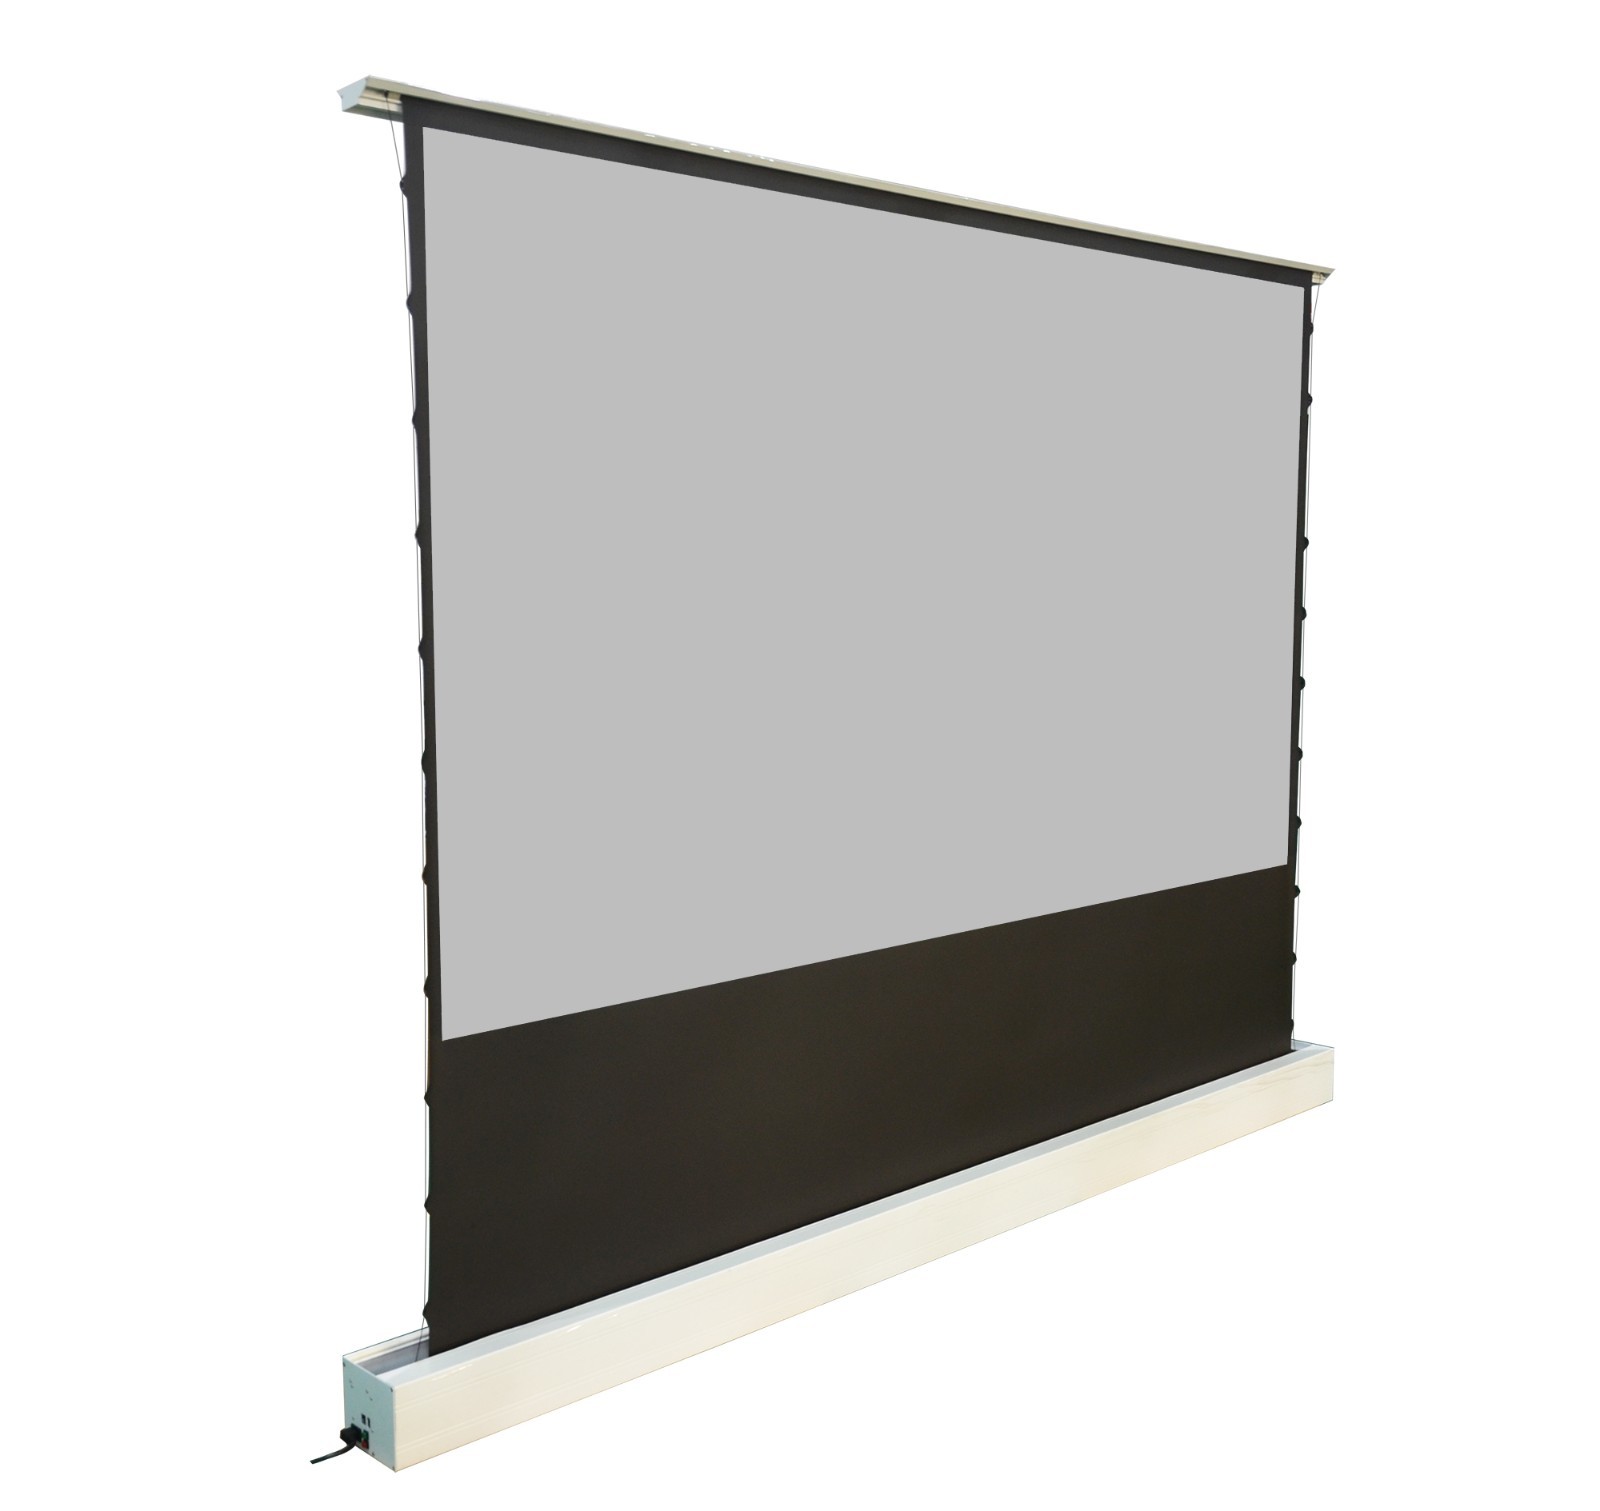 manual pull up projector screen factory for indoors